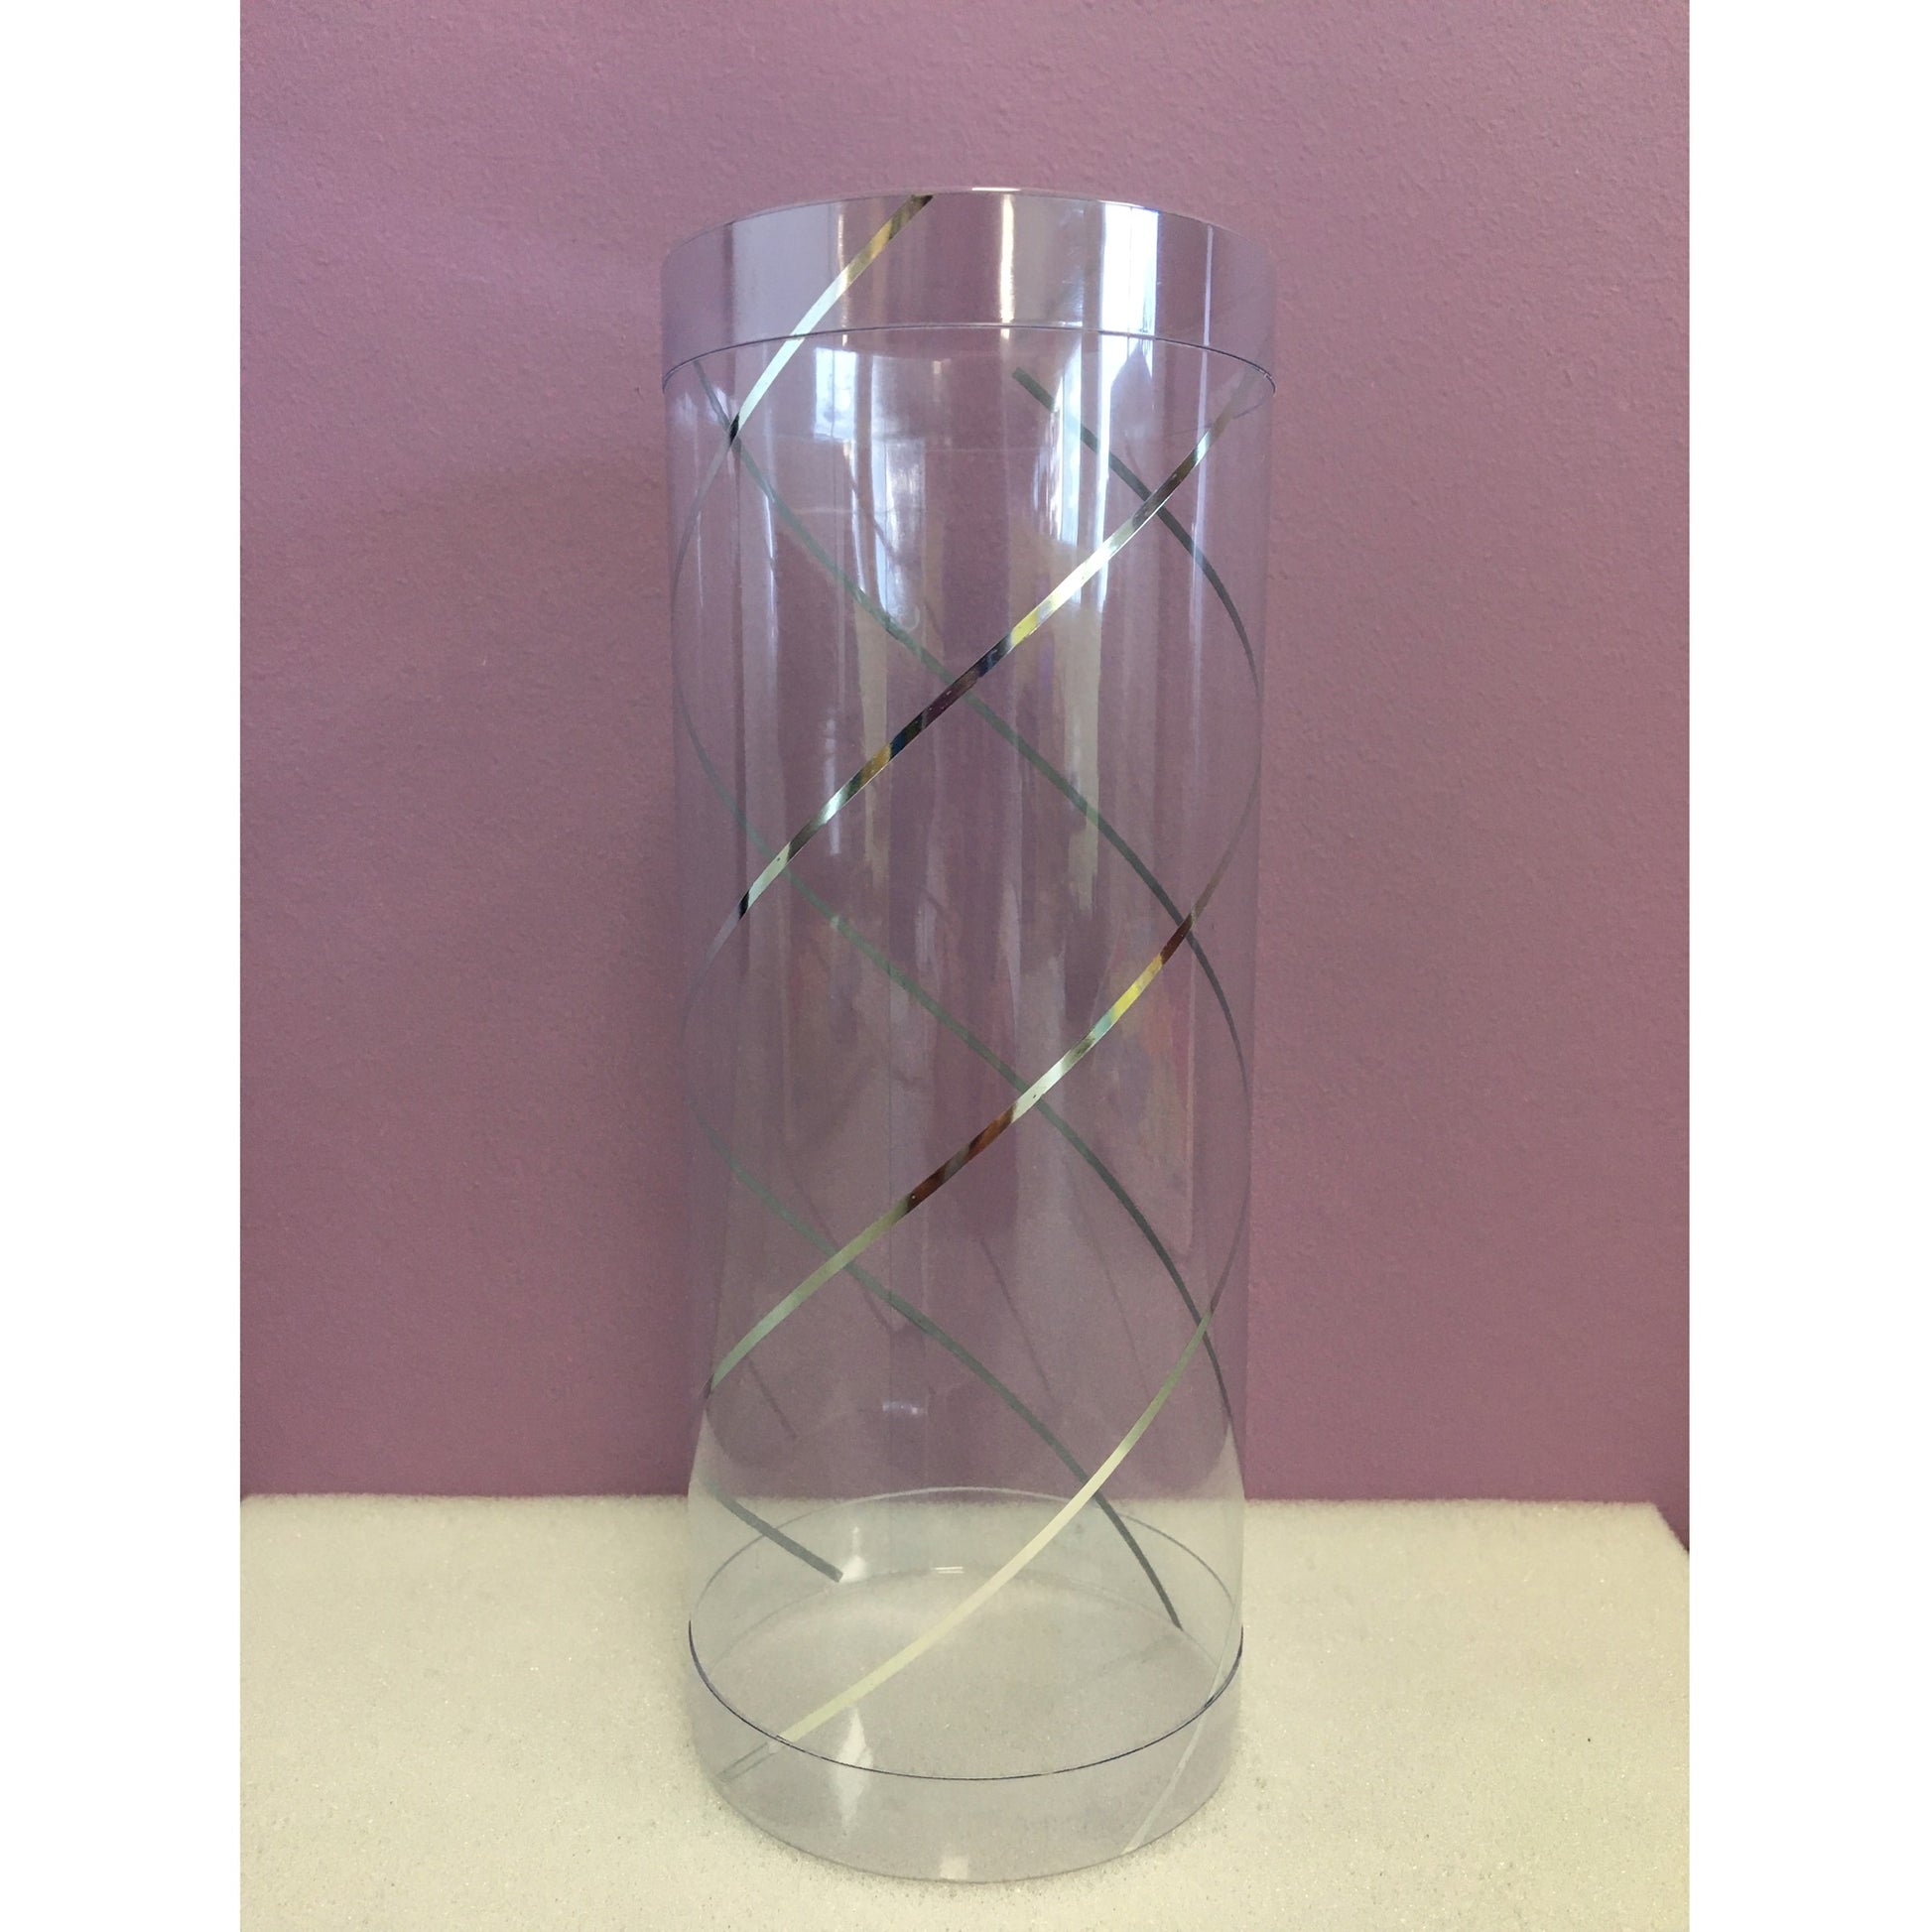 The image displays a clear acetate plastic cylinder, featuring a simple yet elegant design with crisscrossing metallic lines that spiral around the exterior. The transparent nature of the cylinder allows for the contents to be visible, making it ideal for presenting and showcasing items within.